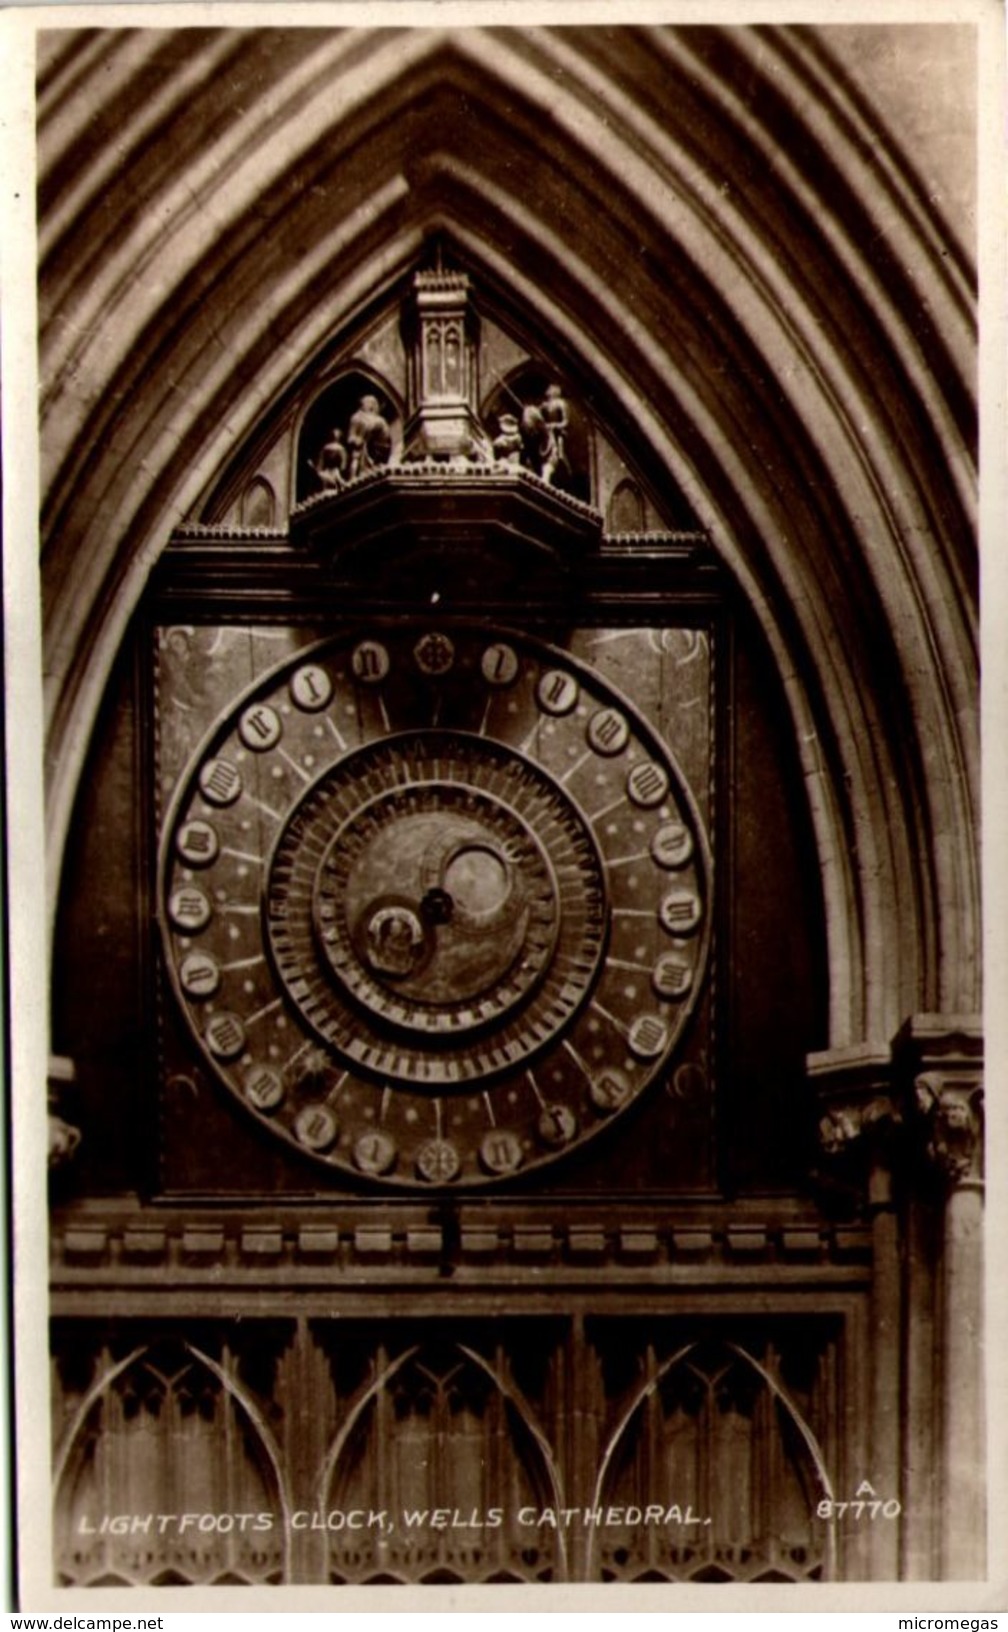 Lightfoots Clock, Wells Cathedral - Wells